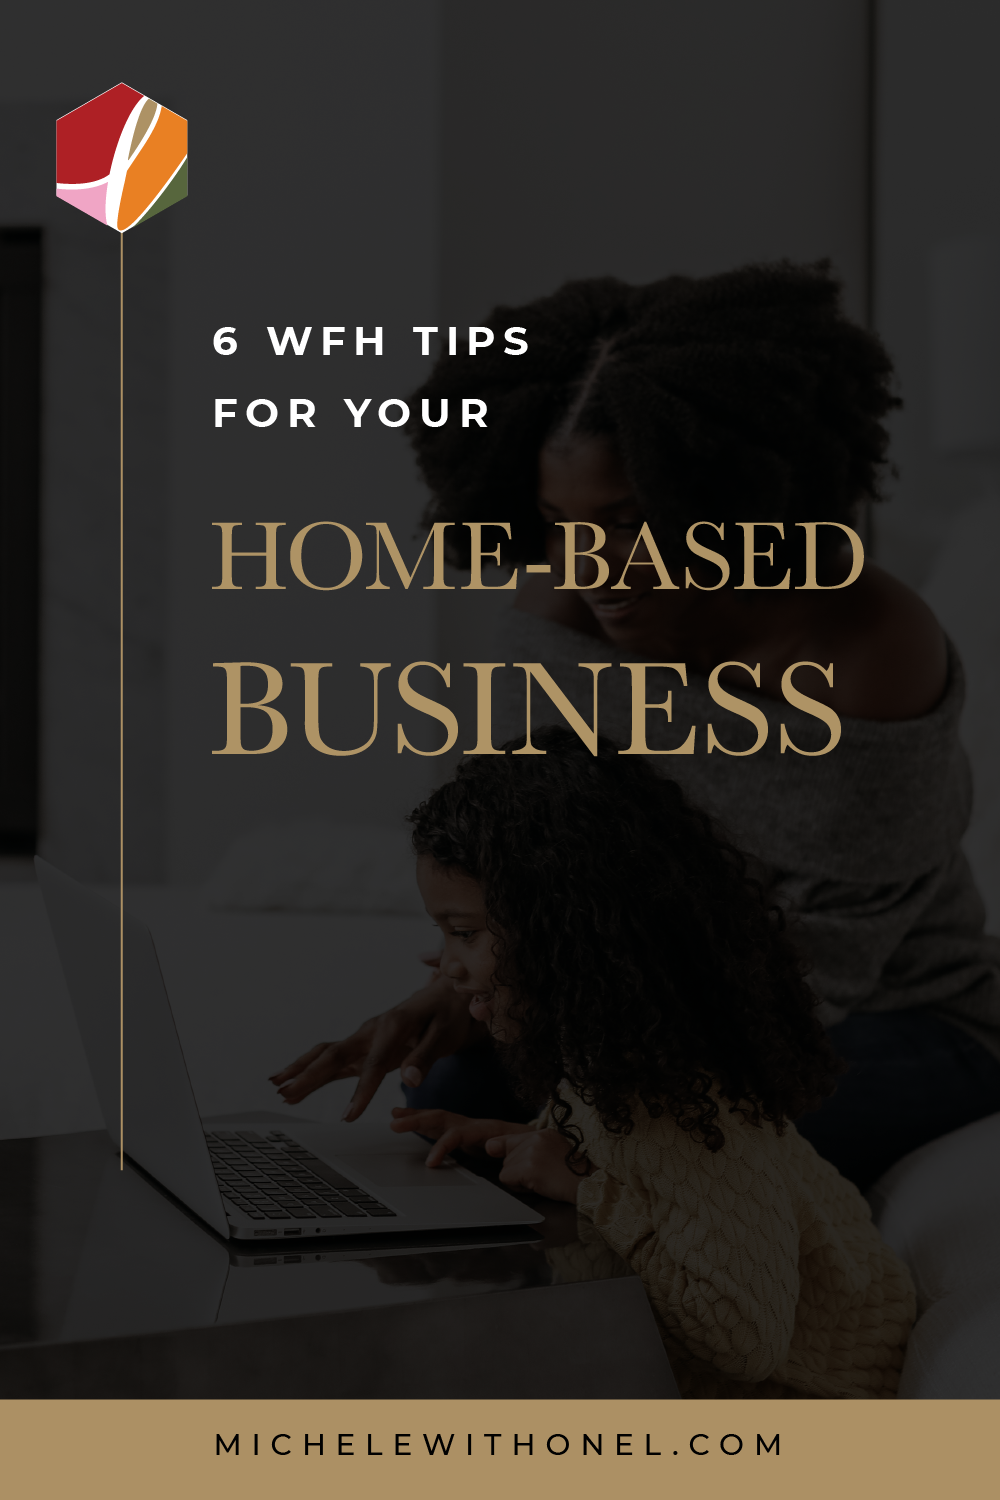 Are you new to working at home? If so, these 6 WFH Tips offer practical advice for running a home-based business. Read now to find out ways to manager your work-life balance and get a head start on time blocking, scheduling your days, and even having a snack strategy! #wfh #workfromhome #smallbusinesstips #entreprenuer